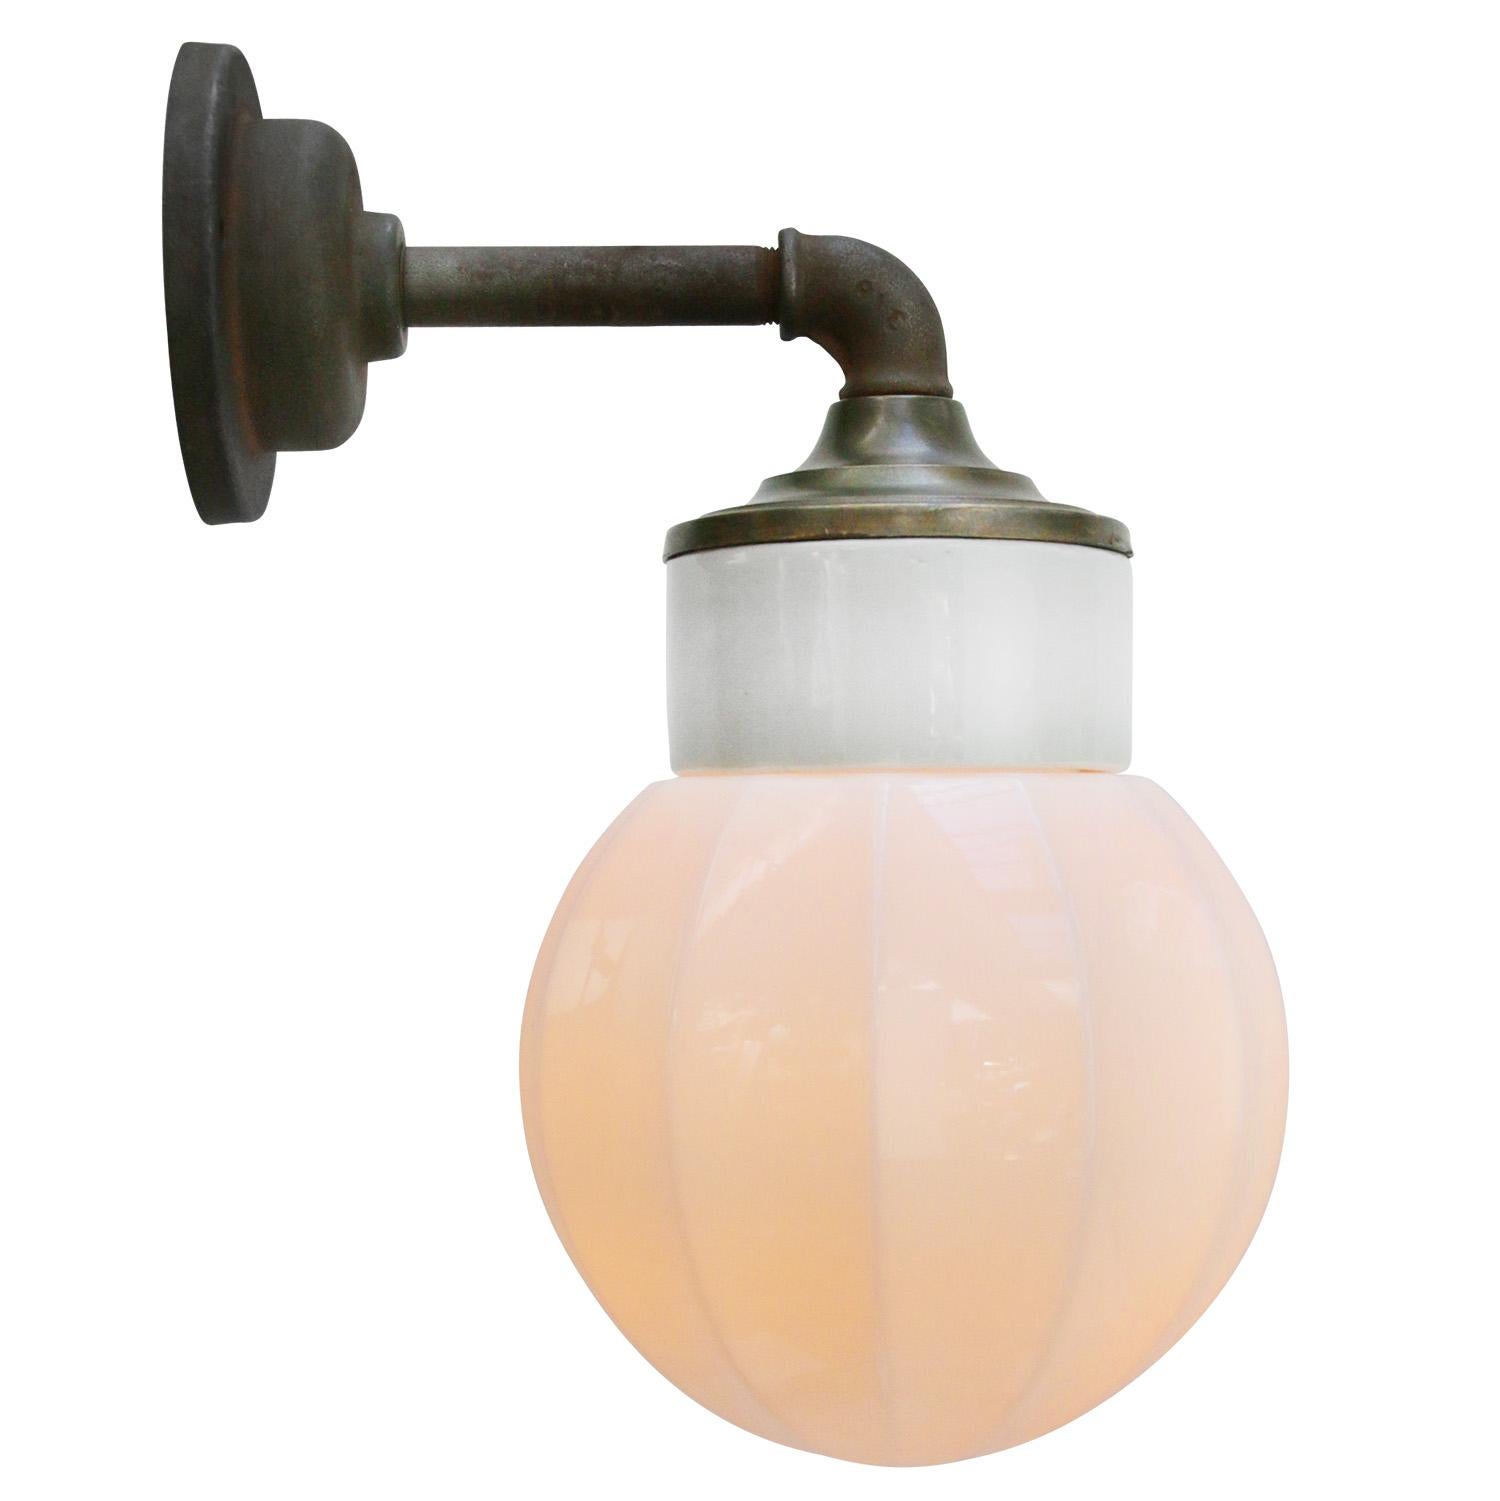 Porcelain industrial wall lamp.
White porcelain, cast iron, brass and Opaline milk glass.
2 conductors, no ground.

For use inside only

Measures: Weight: 2.10 kg / 4.6 lb

Priced per individual item. All lamps have been made suitable by